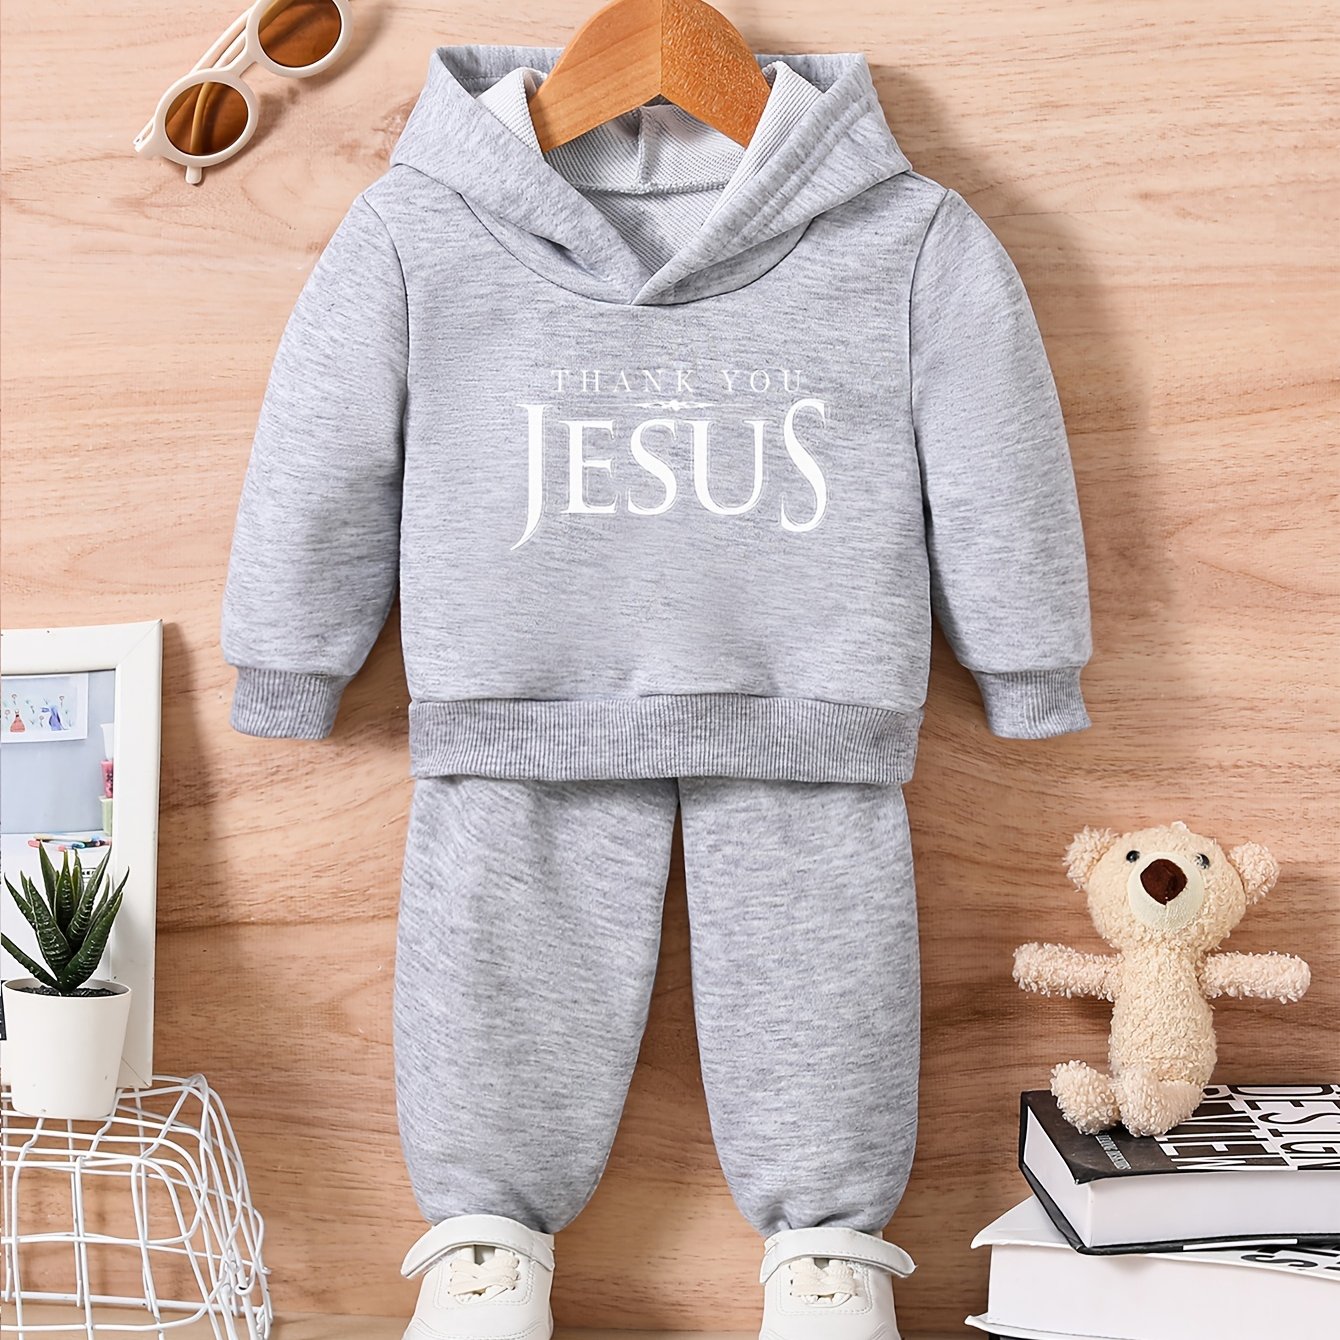 THANK YOU JESUS Toddler Christian Casual Outfit claimedbygoddesigns